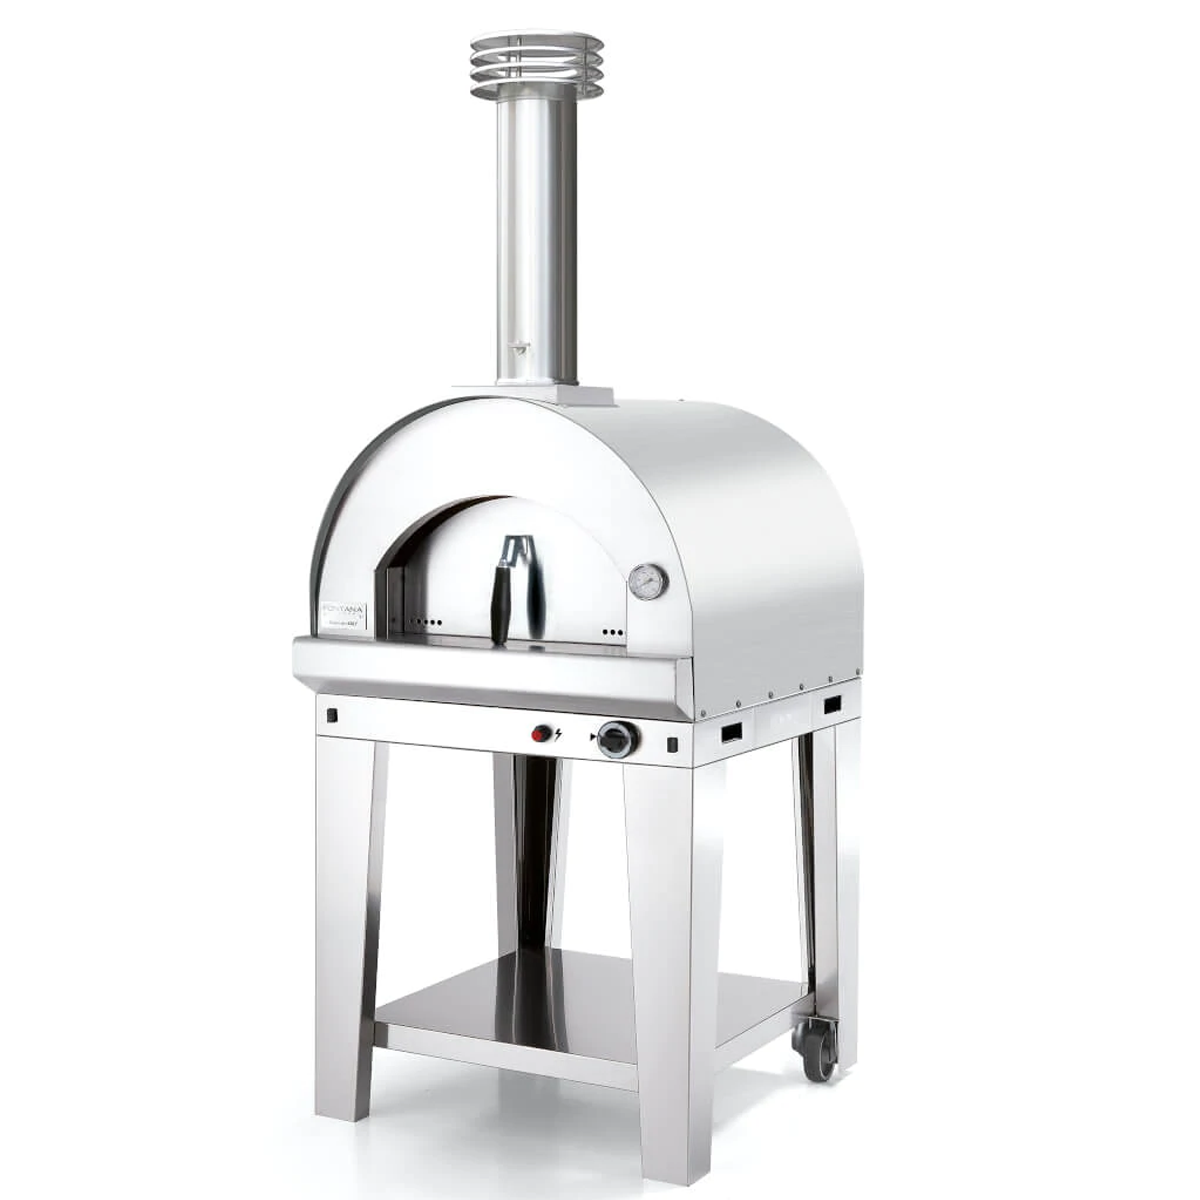 The Margherita Home Gas Pizza Oven